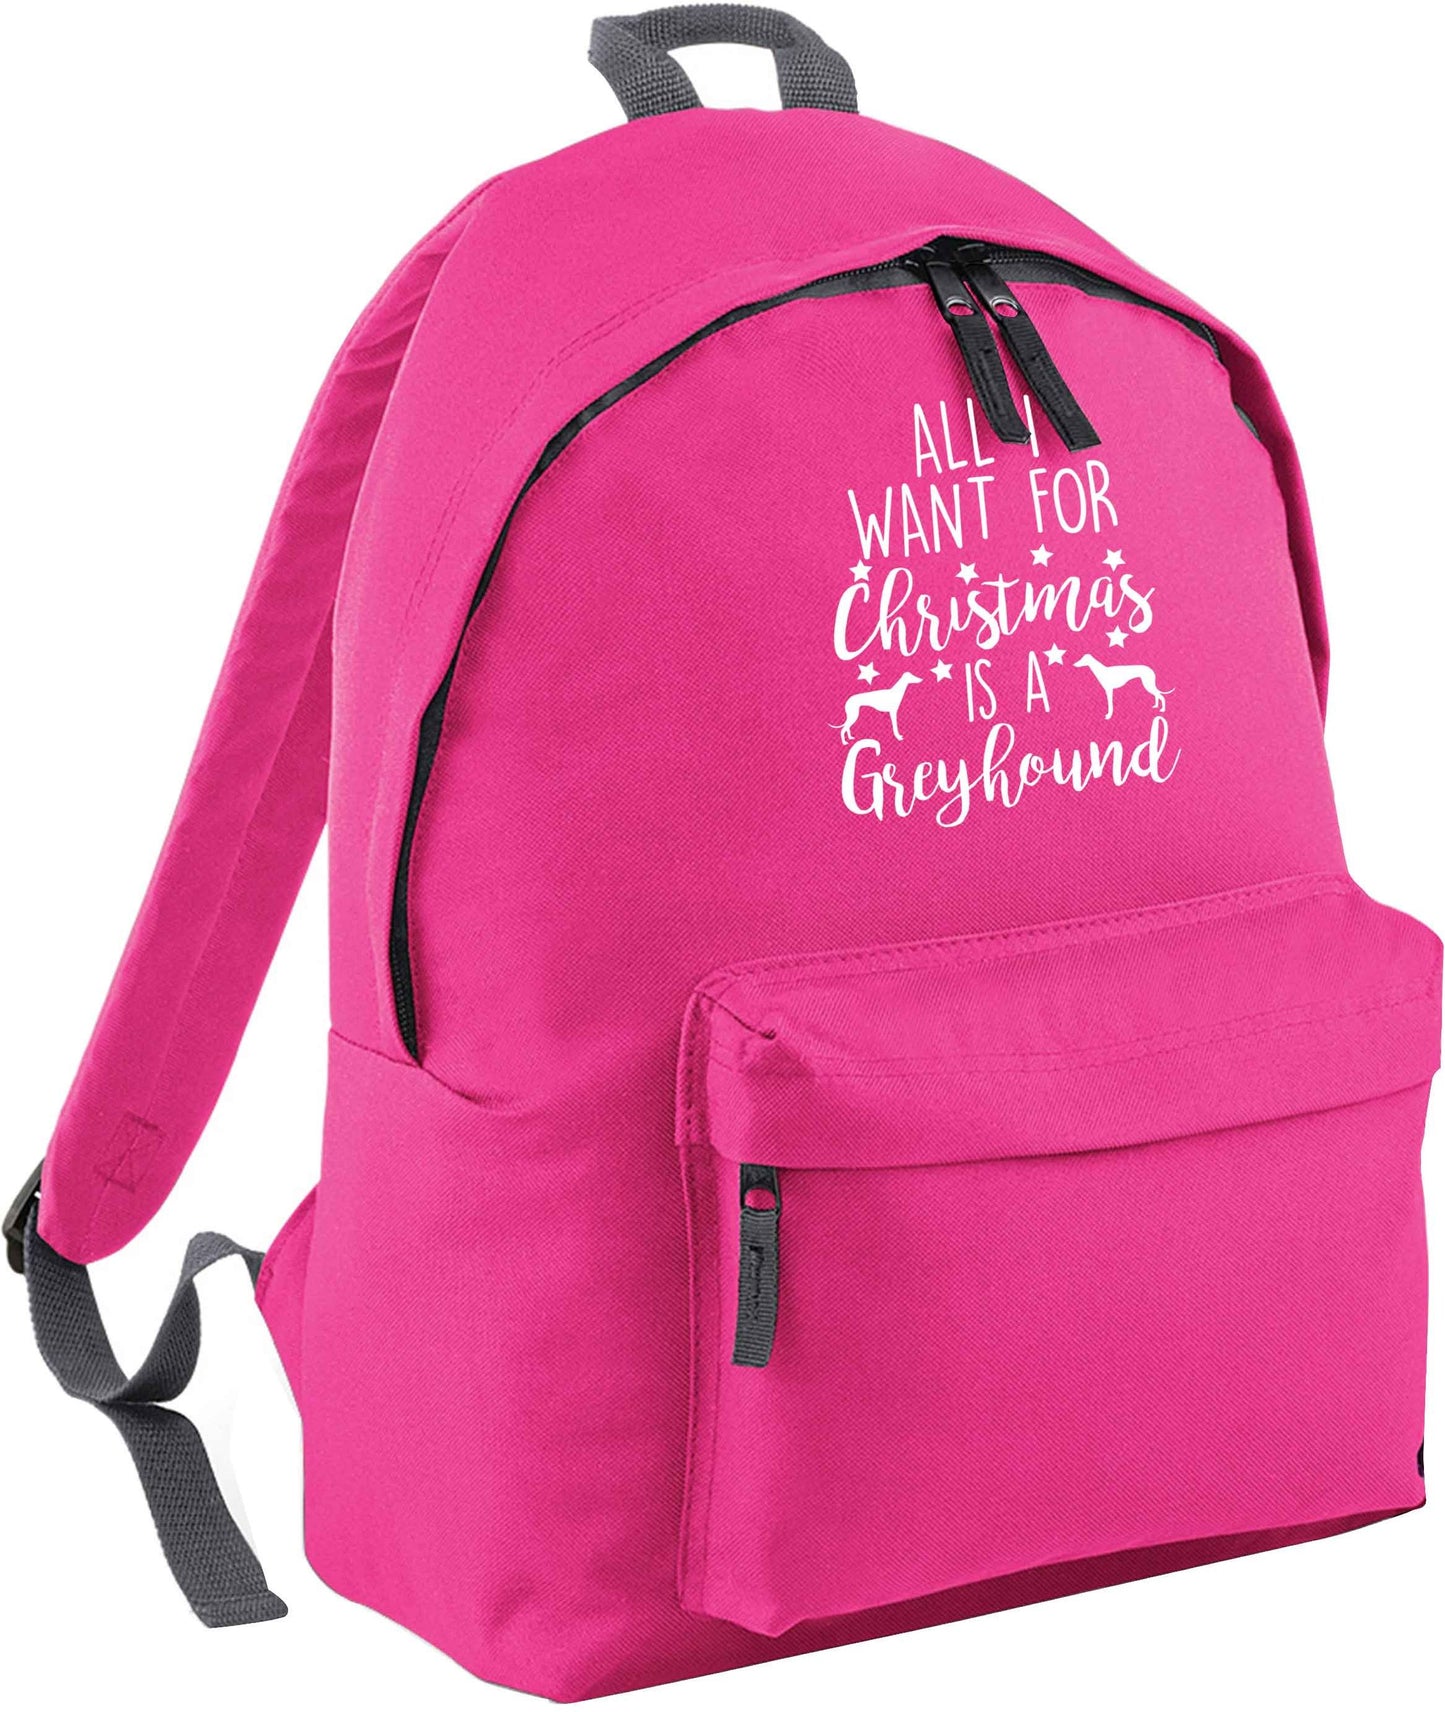 All I want for Christmas is a greyhound | Children's backpack